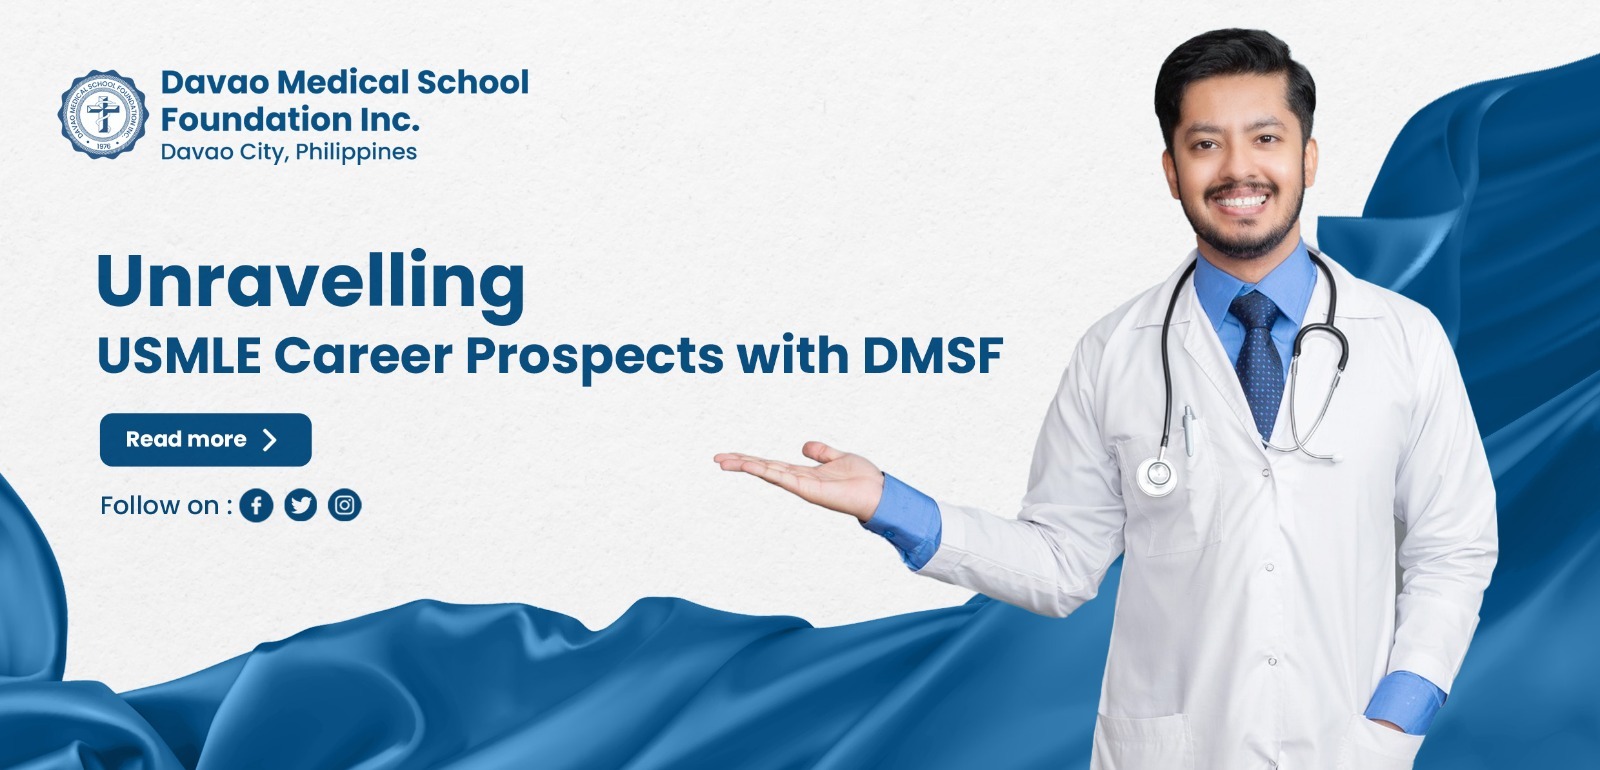 Unravelling USMLE Career Prospects with DMSF